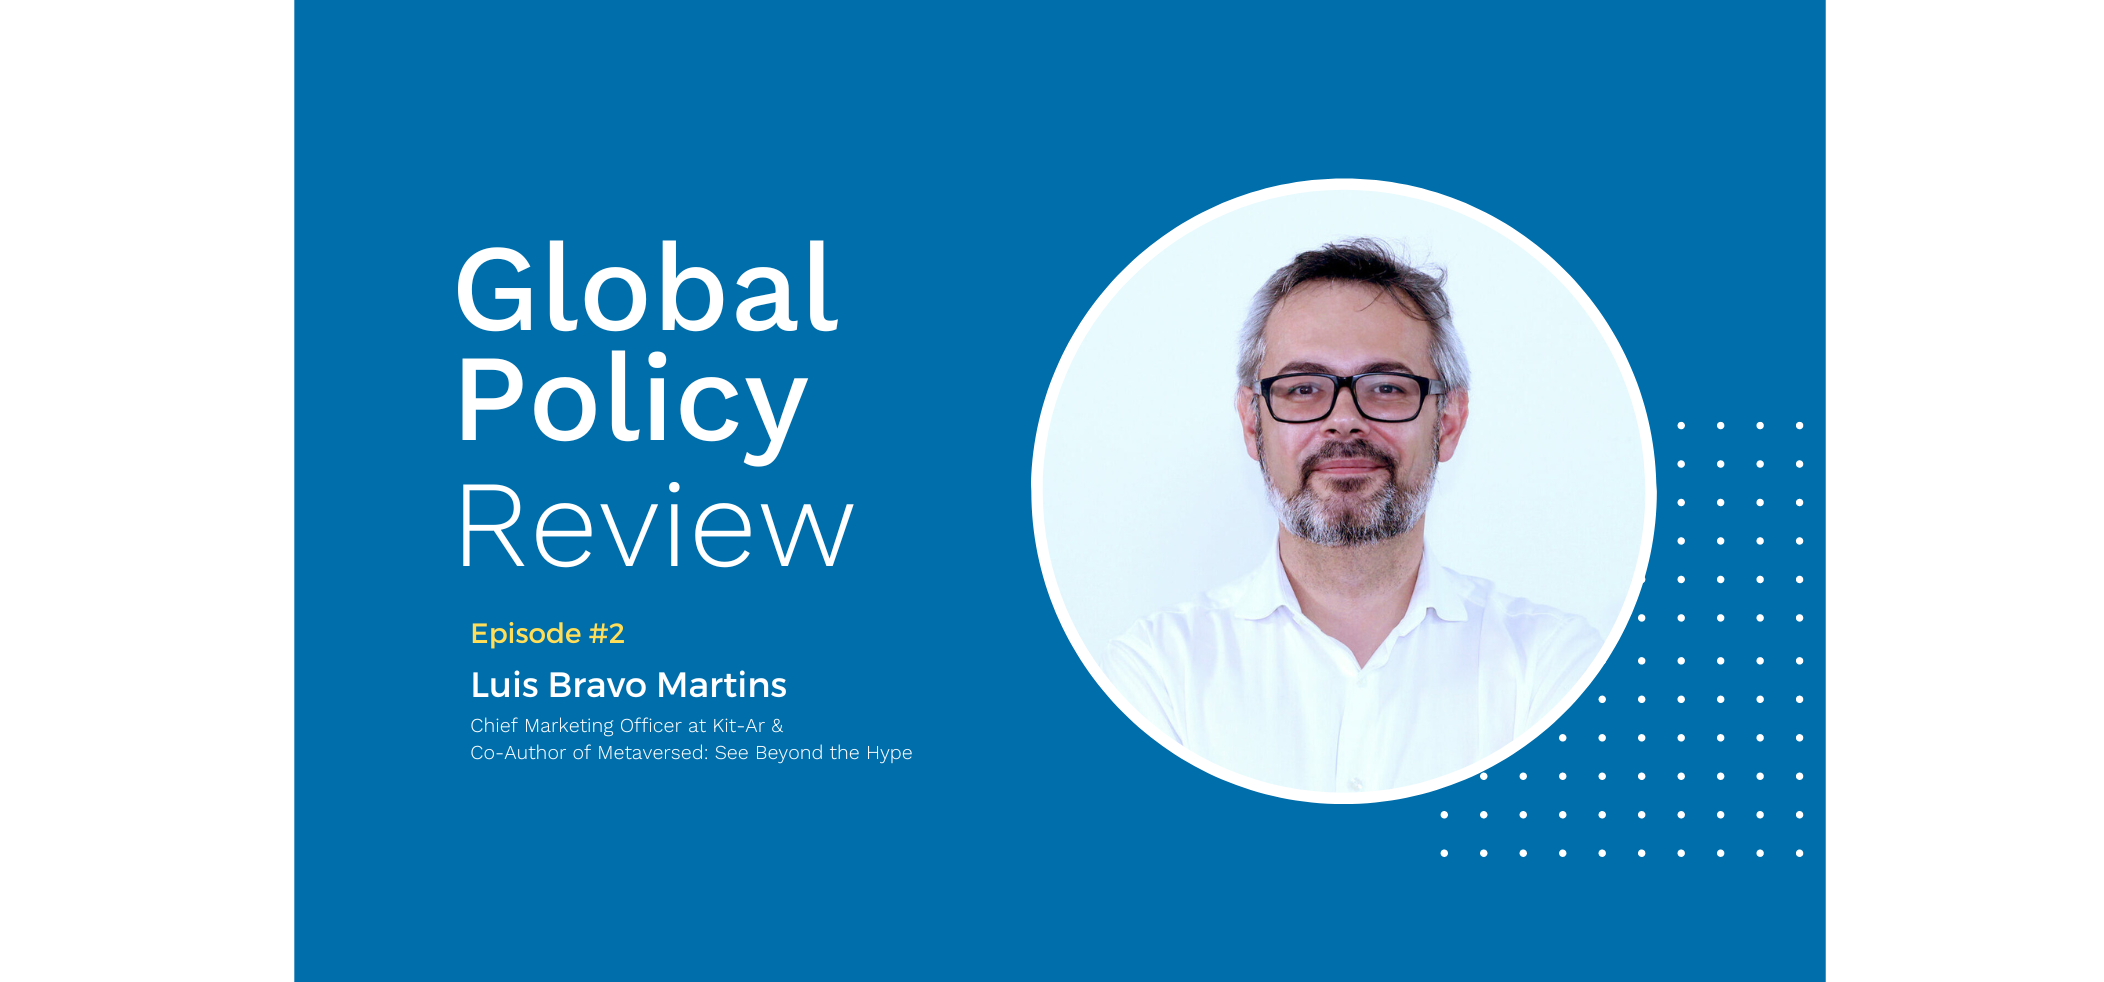 Global Policy Review Podcast | Bridging Realities through Policy and Innovation with Luis Bravo Martins